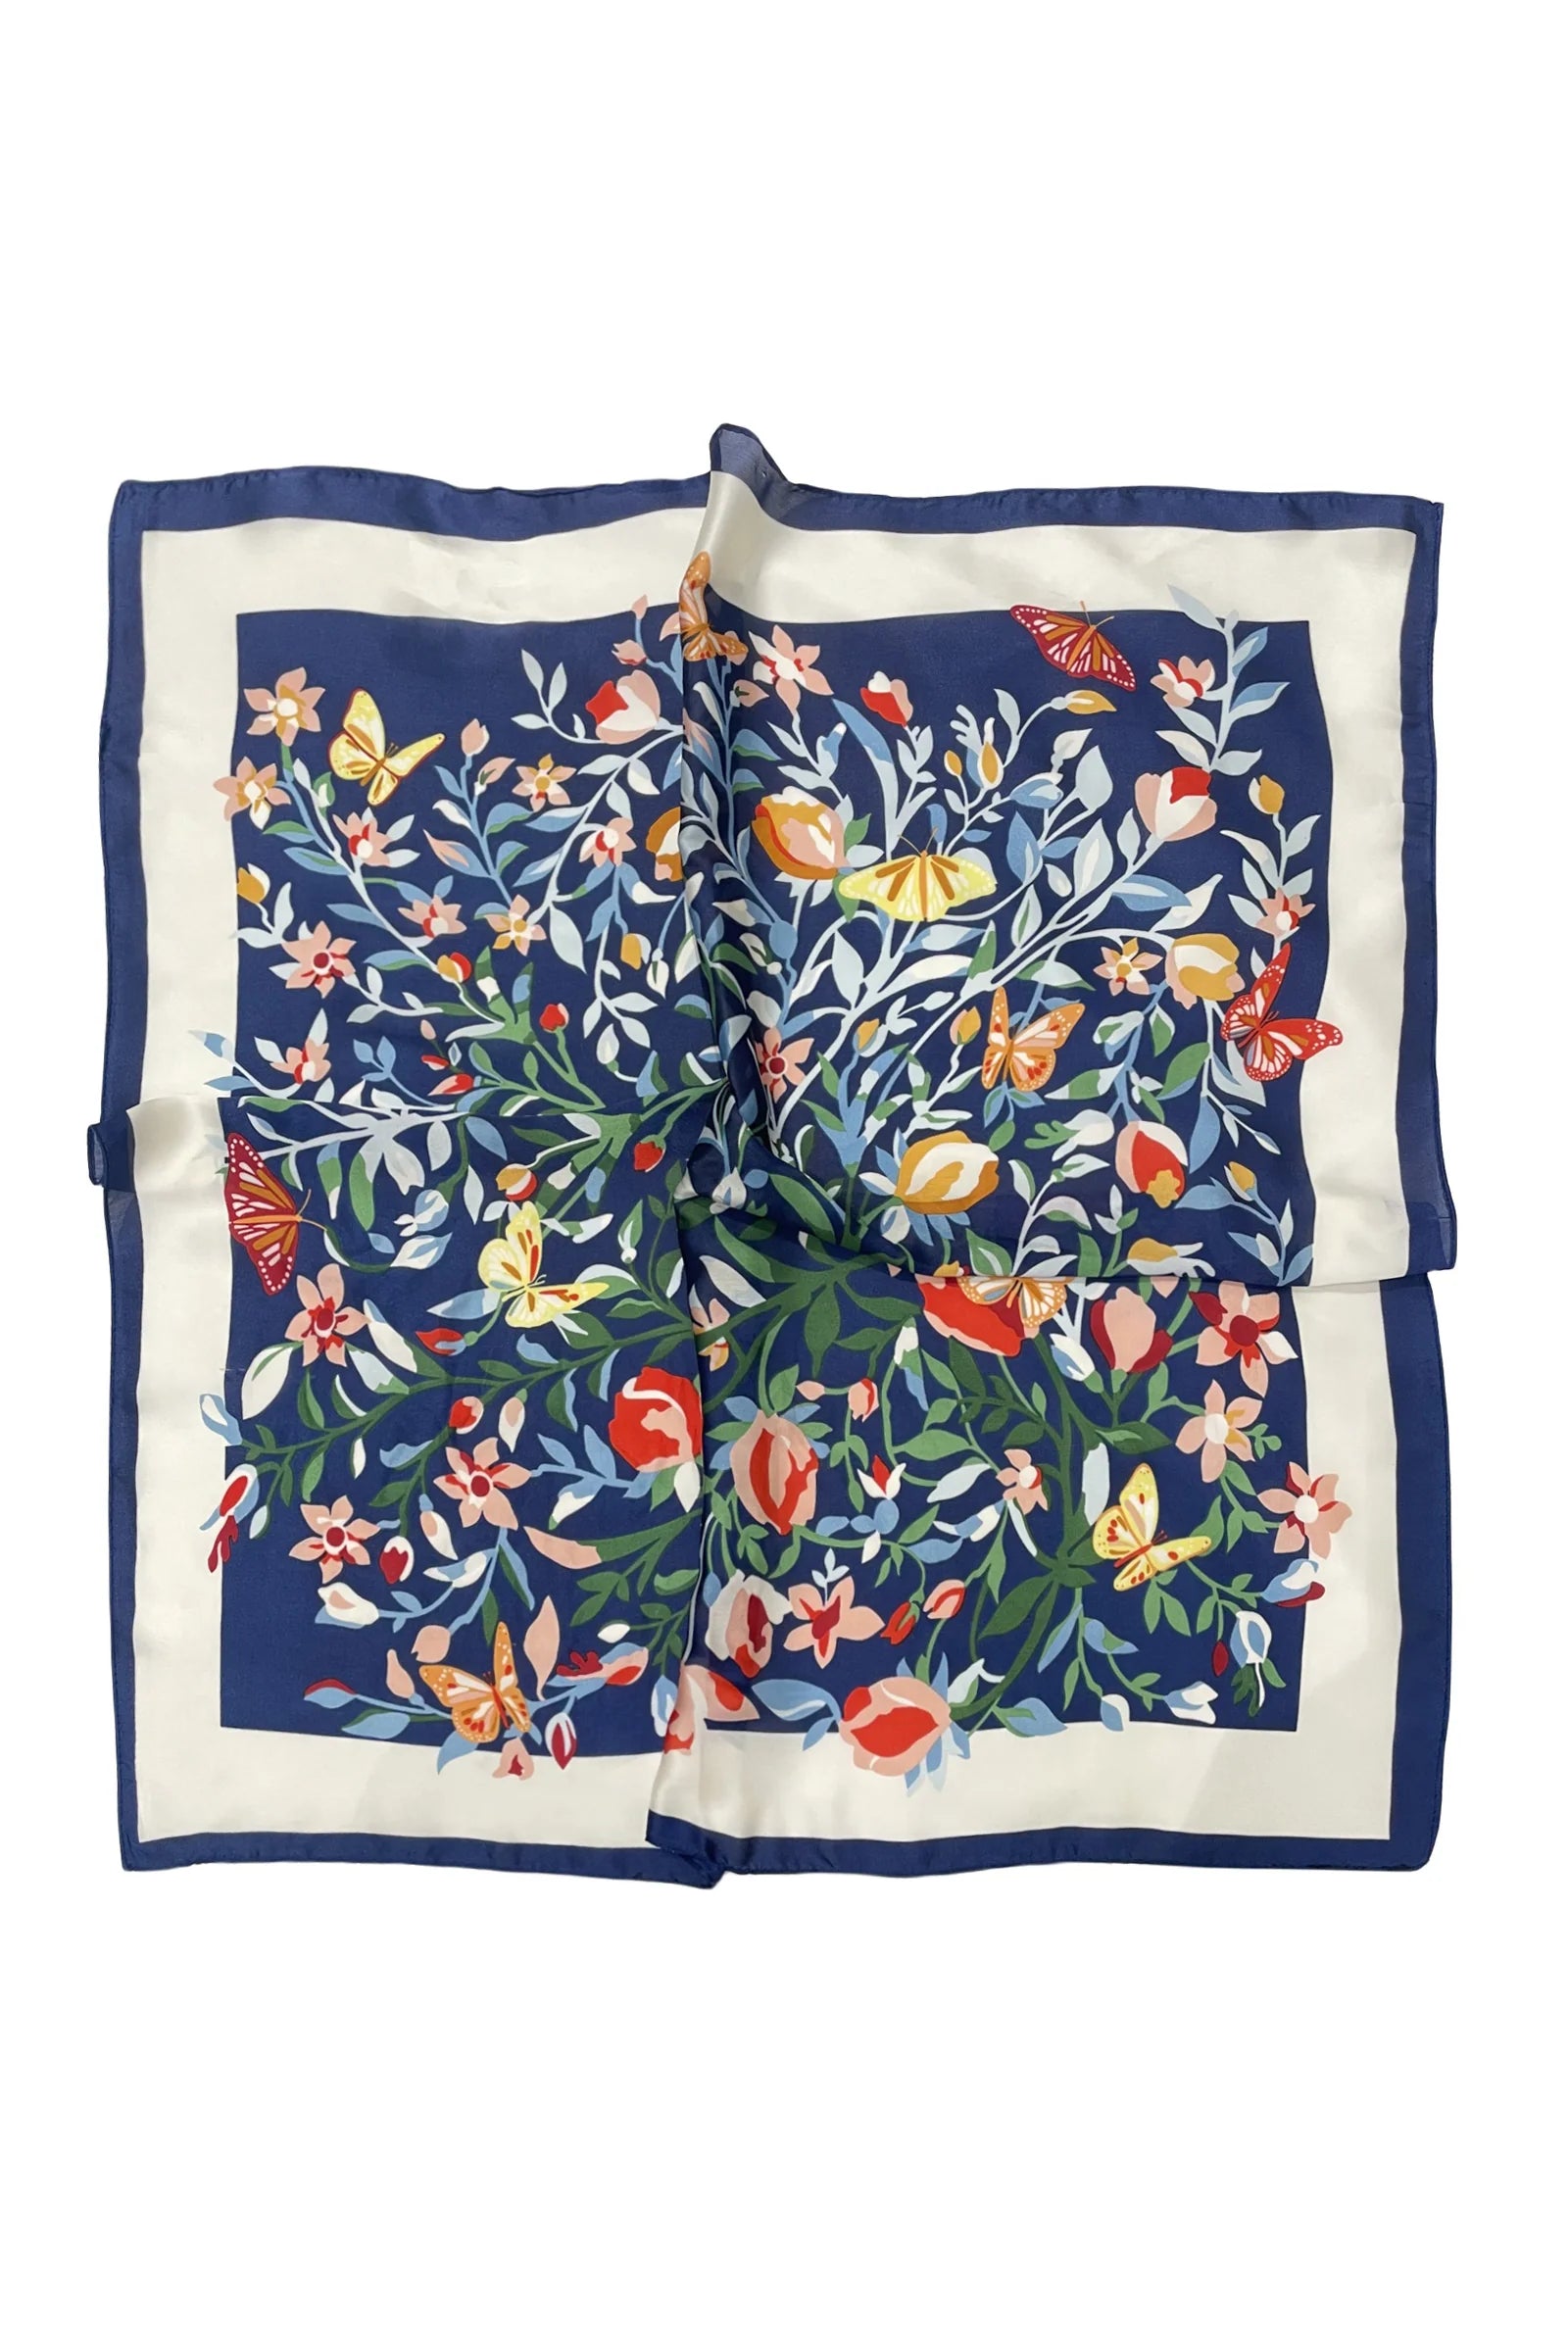 Butterfly Floral Border Print Square Scarf - Navy - Oxford Blue